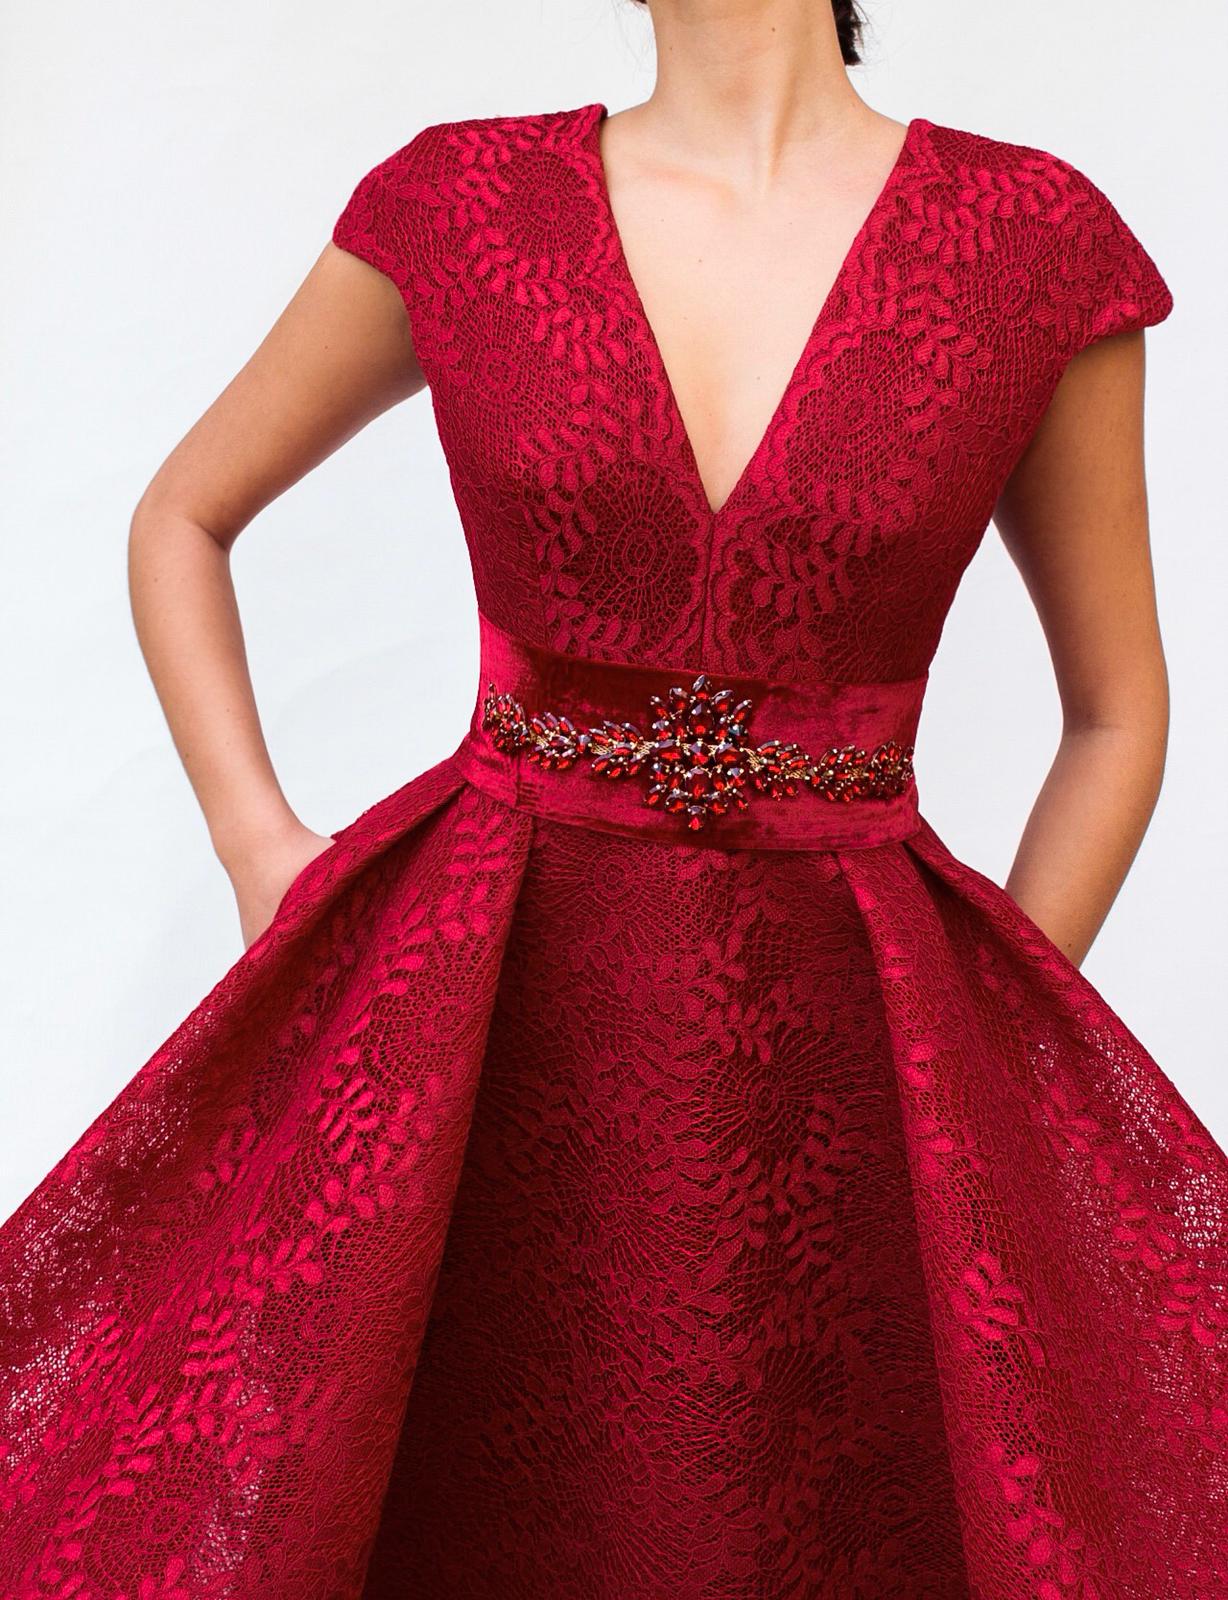 Red A-Line dress with v-neck, embroidery and no sleeves